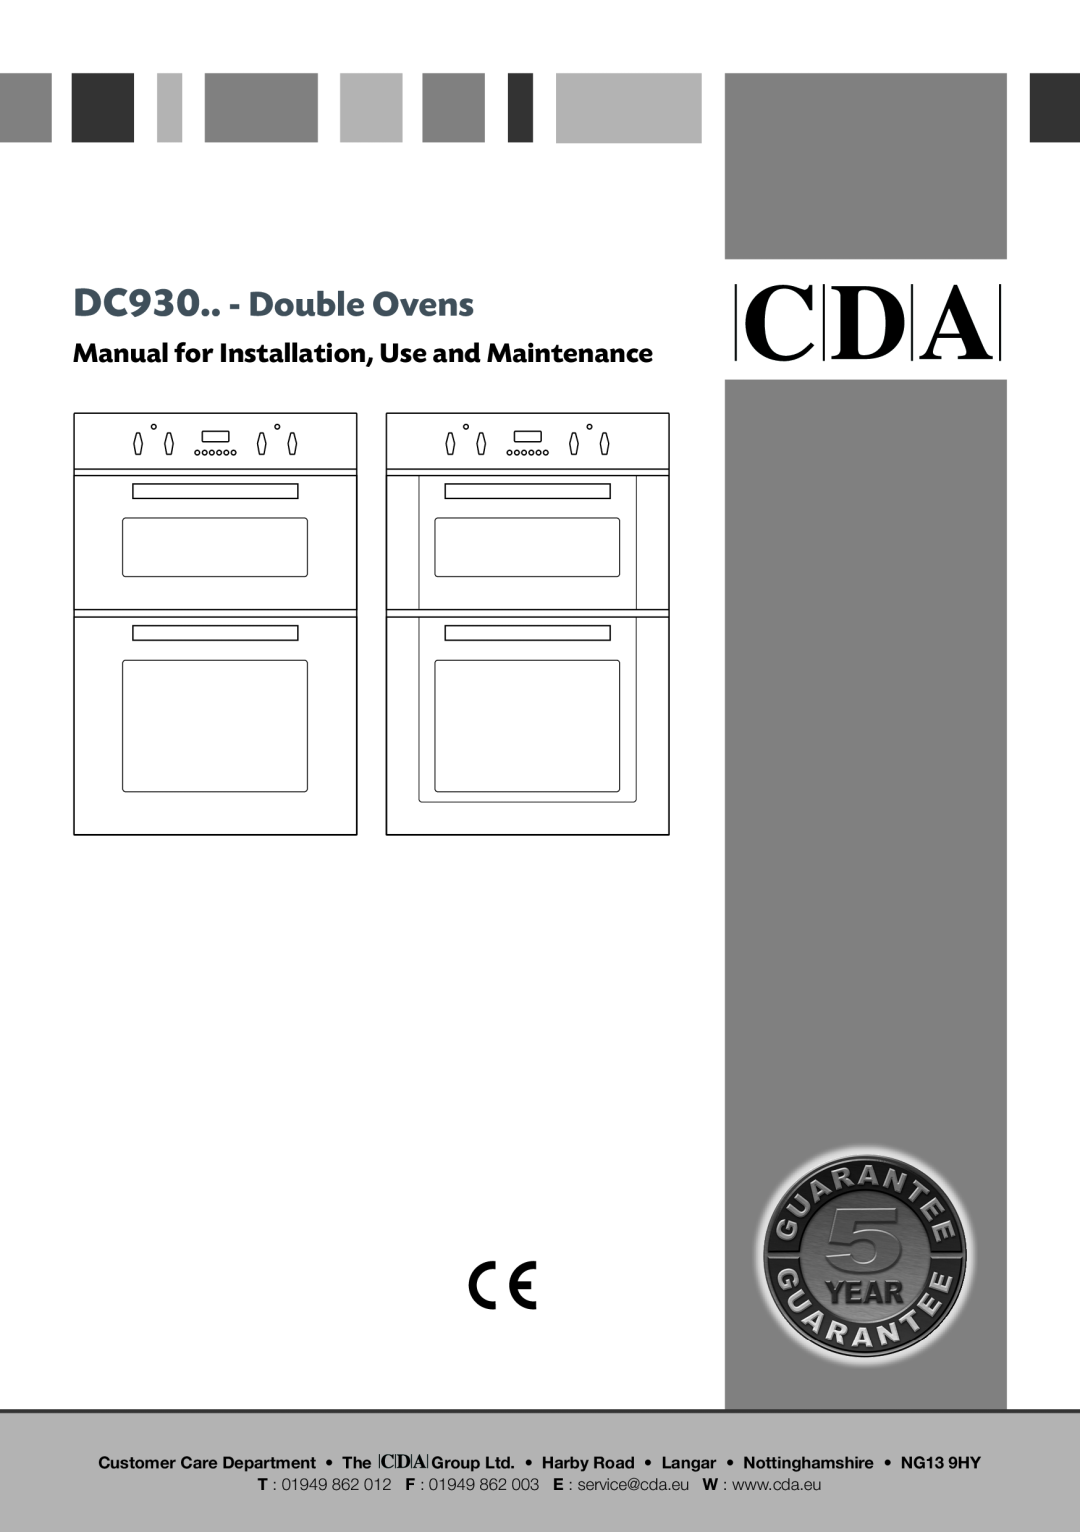 CDA manual DC930.. - Double Ovens, Manual for Installation, Use and Maintenance, Customer Care Department The 